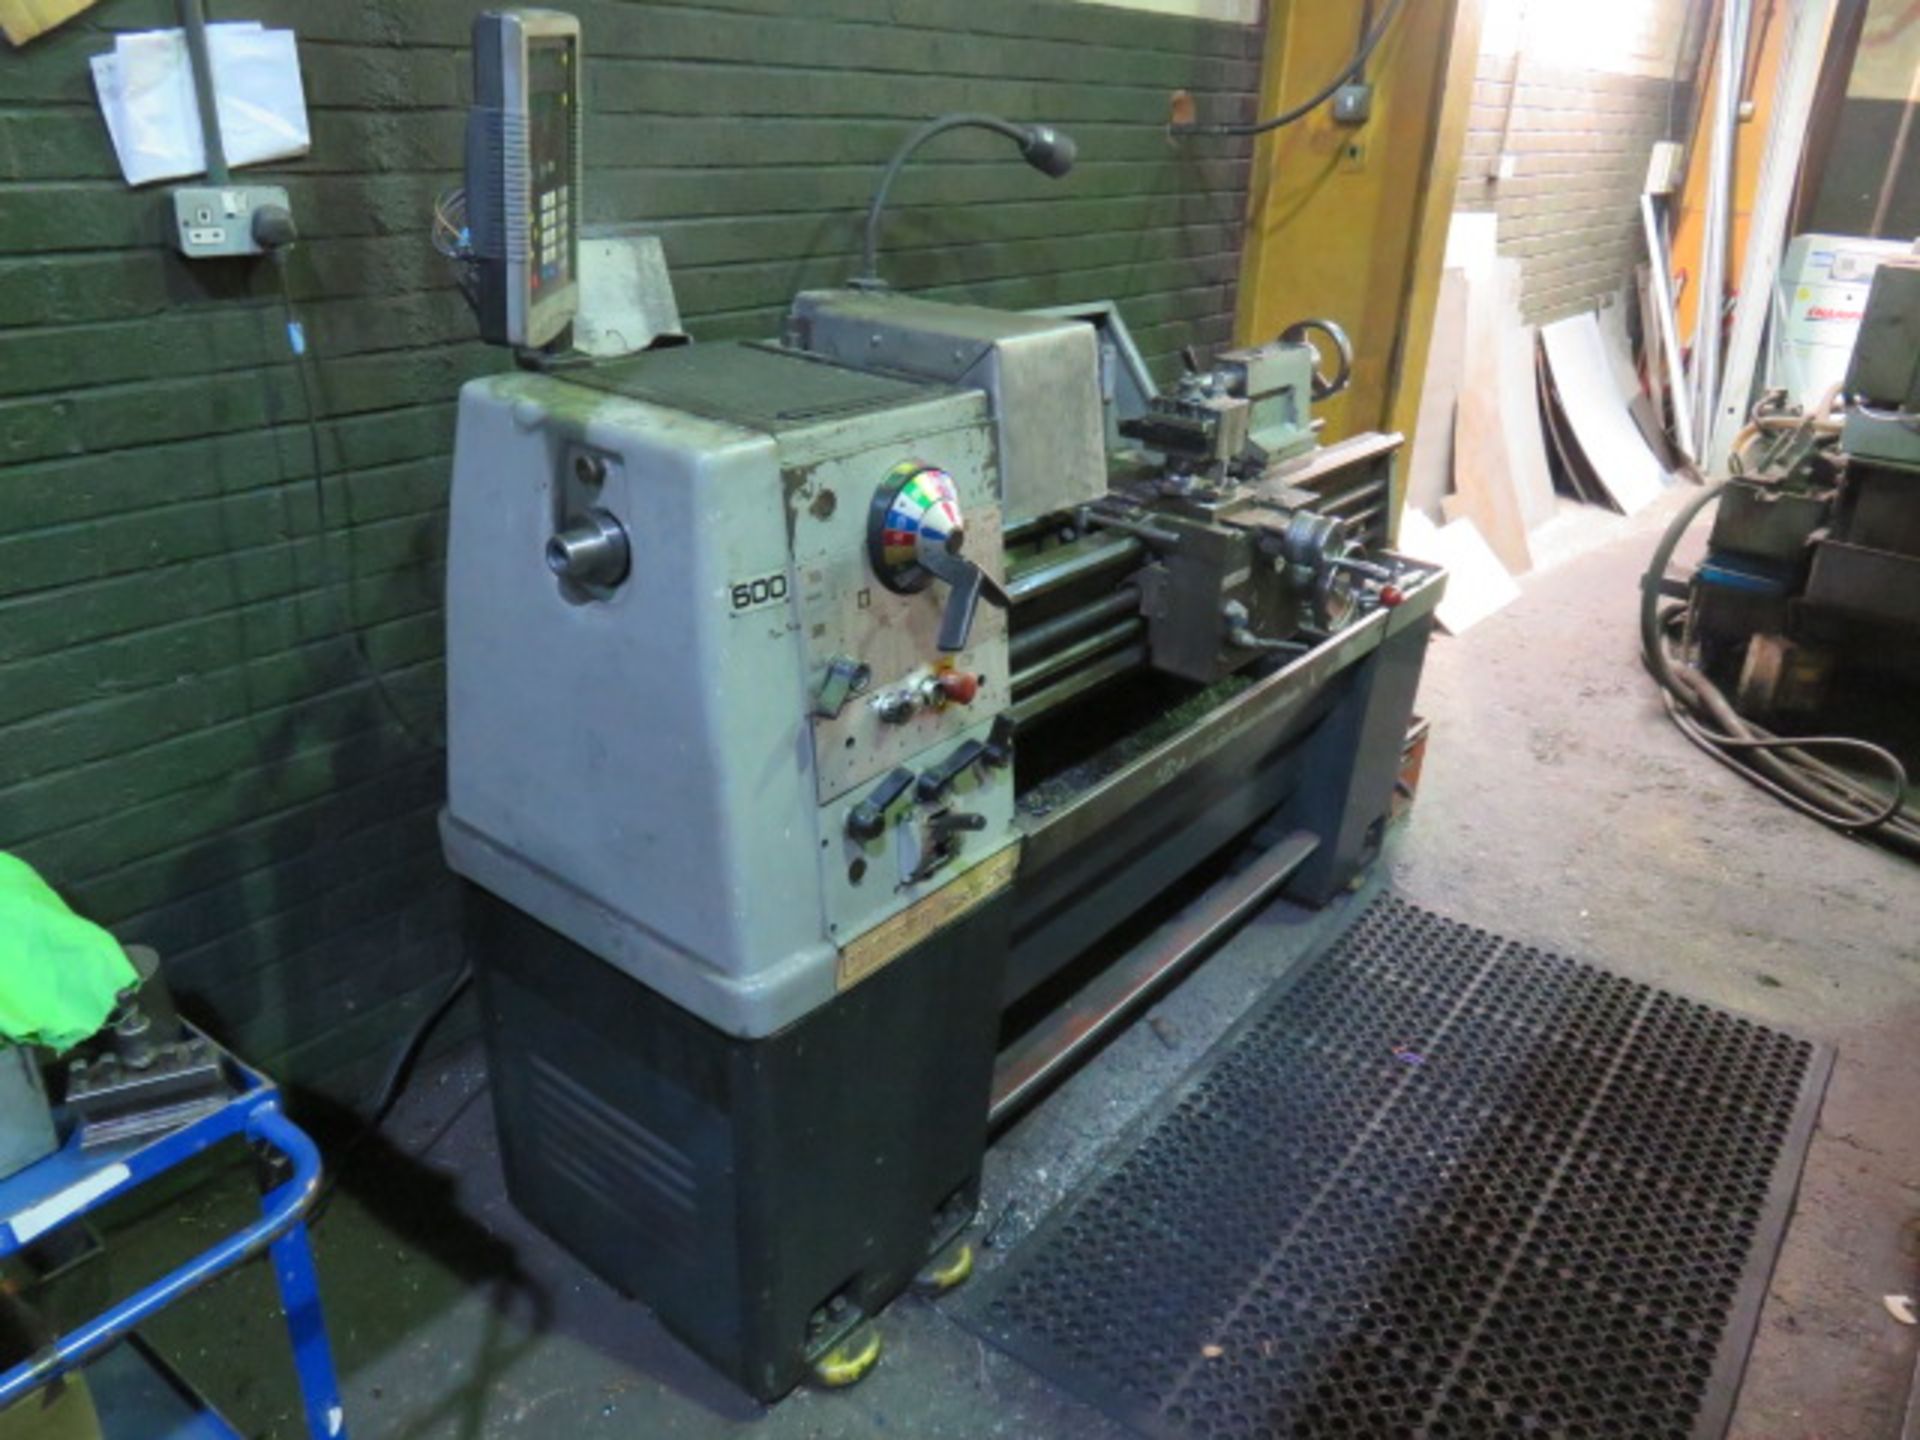 Colchester Master 2500 Centre Lathe Complete With Newall ControlsSerial No. 57/0019 08/629(Full RAMS